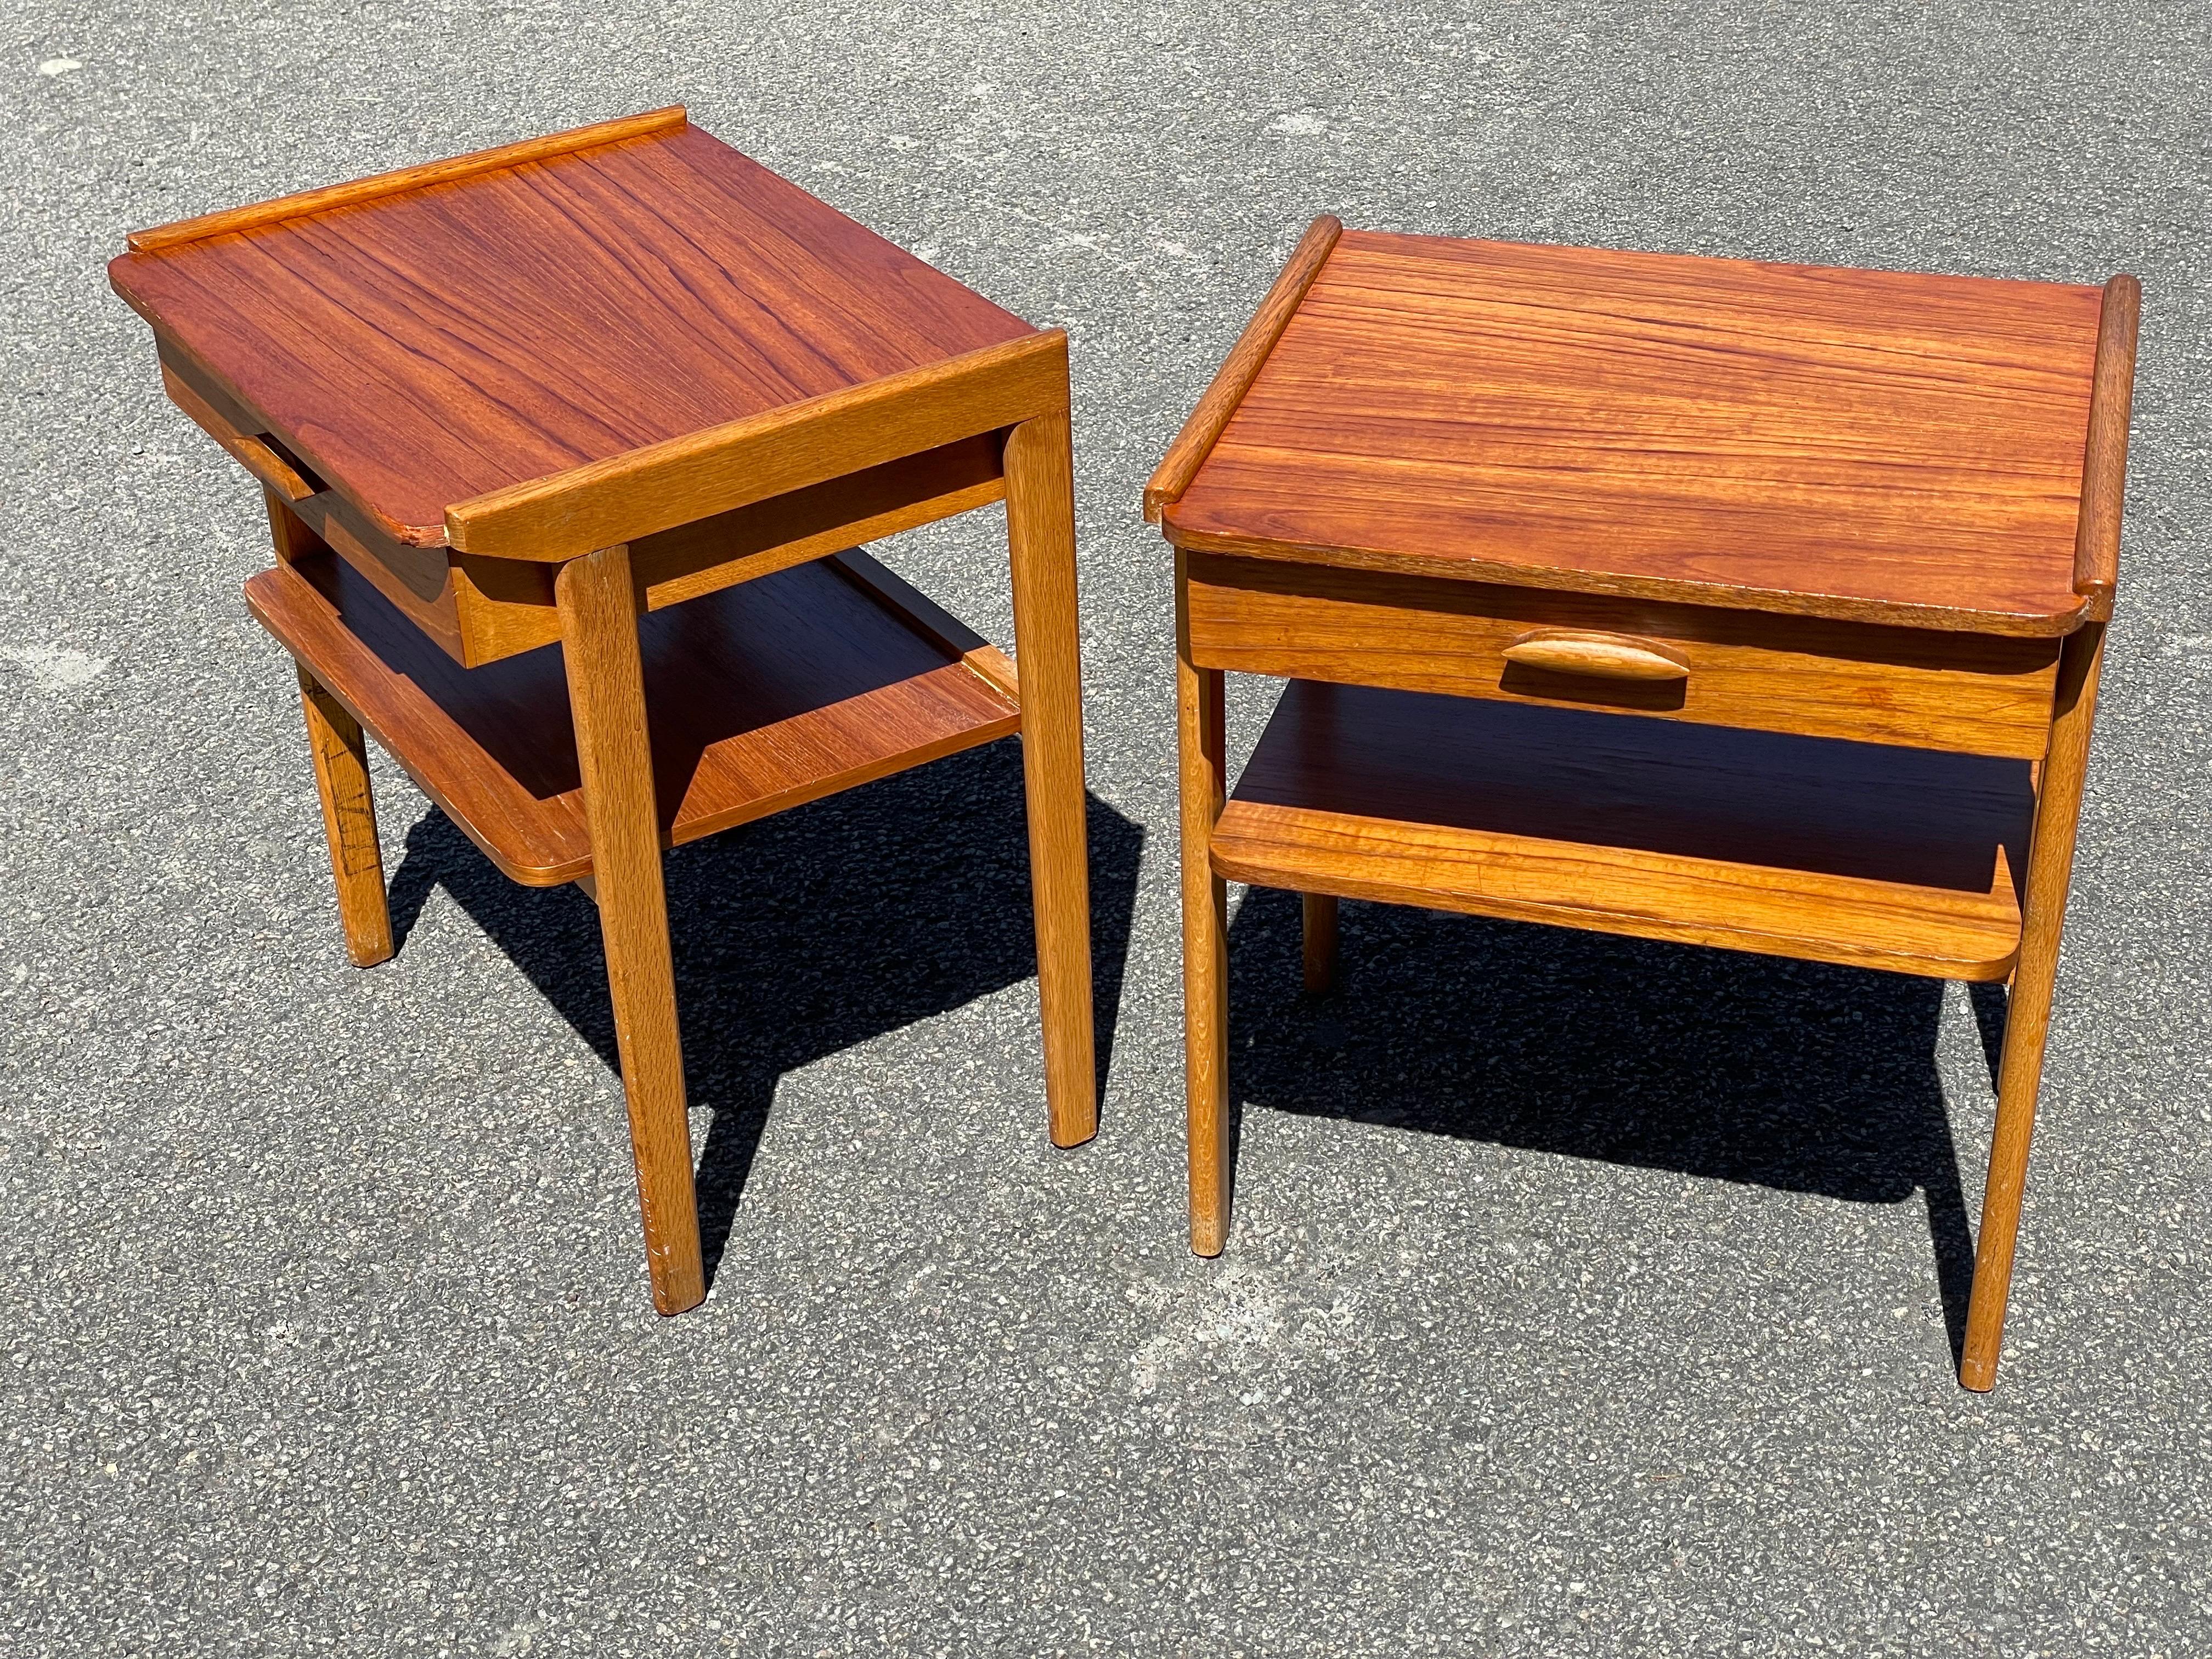 A set of nightstands from the 1960´s. Scandinavian Mid-Century Modern design with exquisite details and good craftmanship.